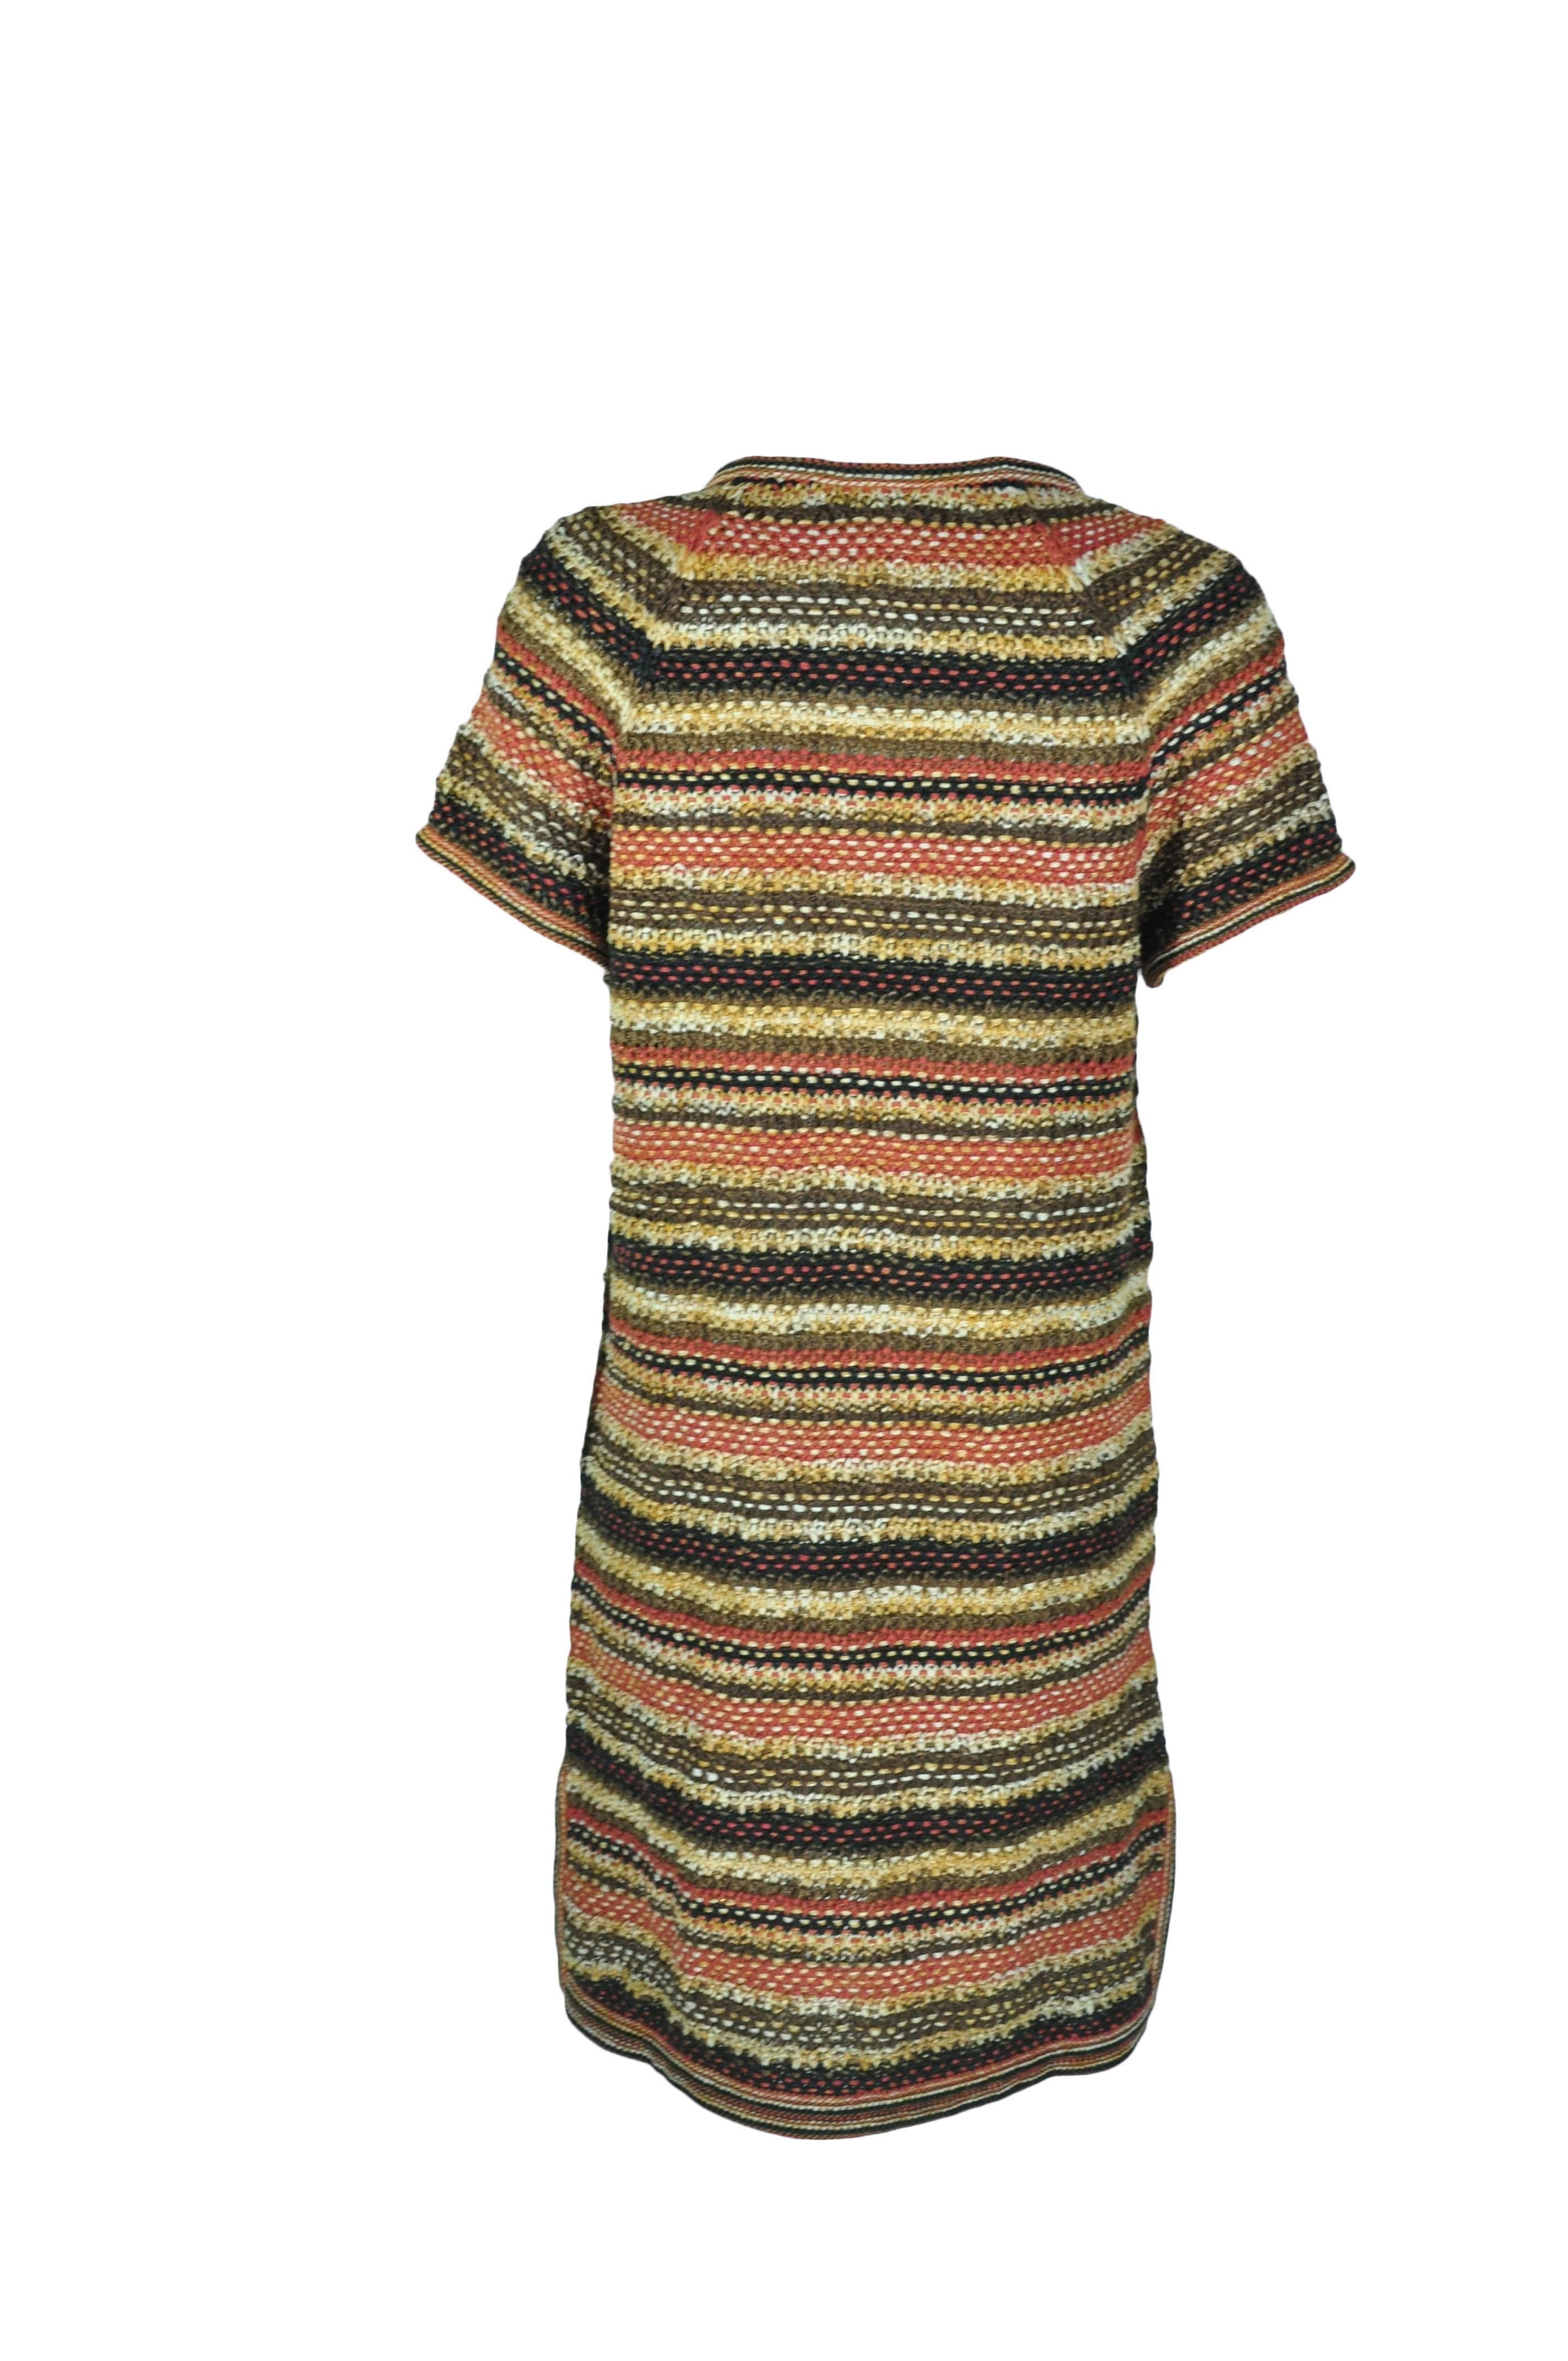 A slip-on multi-color knit dress from Chanel 2018 resort collection.  Crew neck gold toned button fastenings along front with two pockets.  